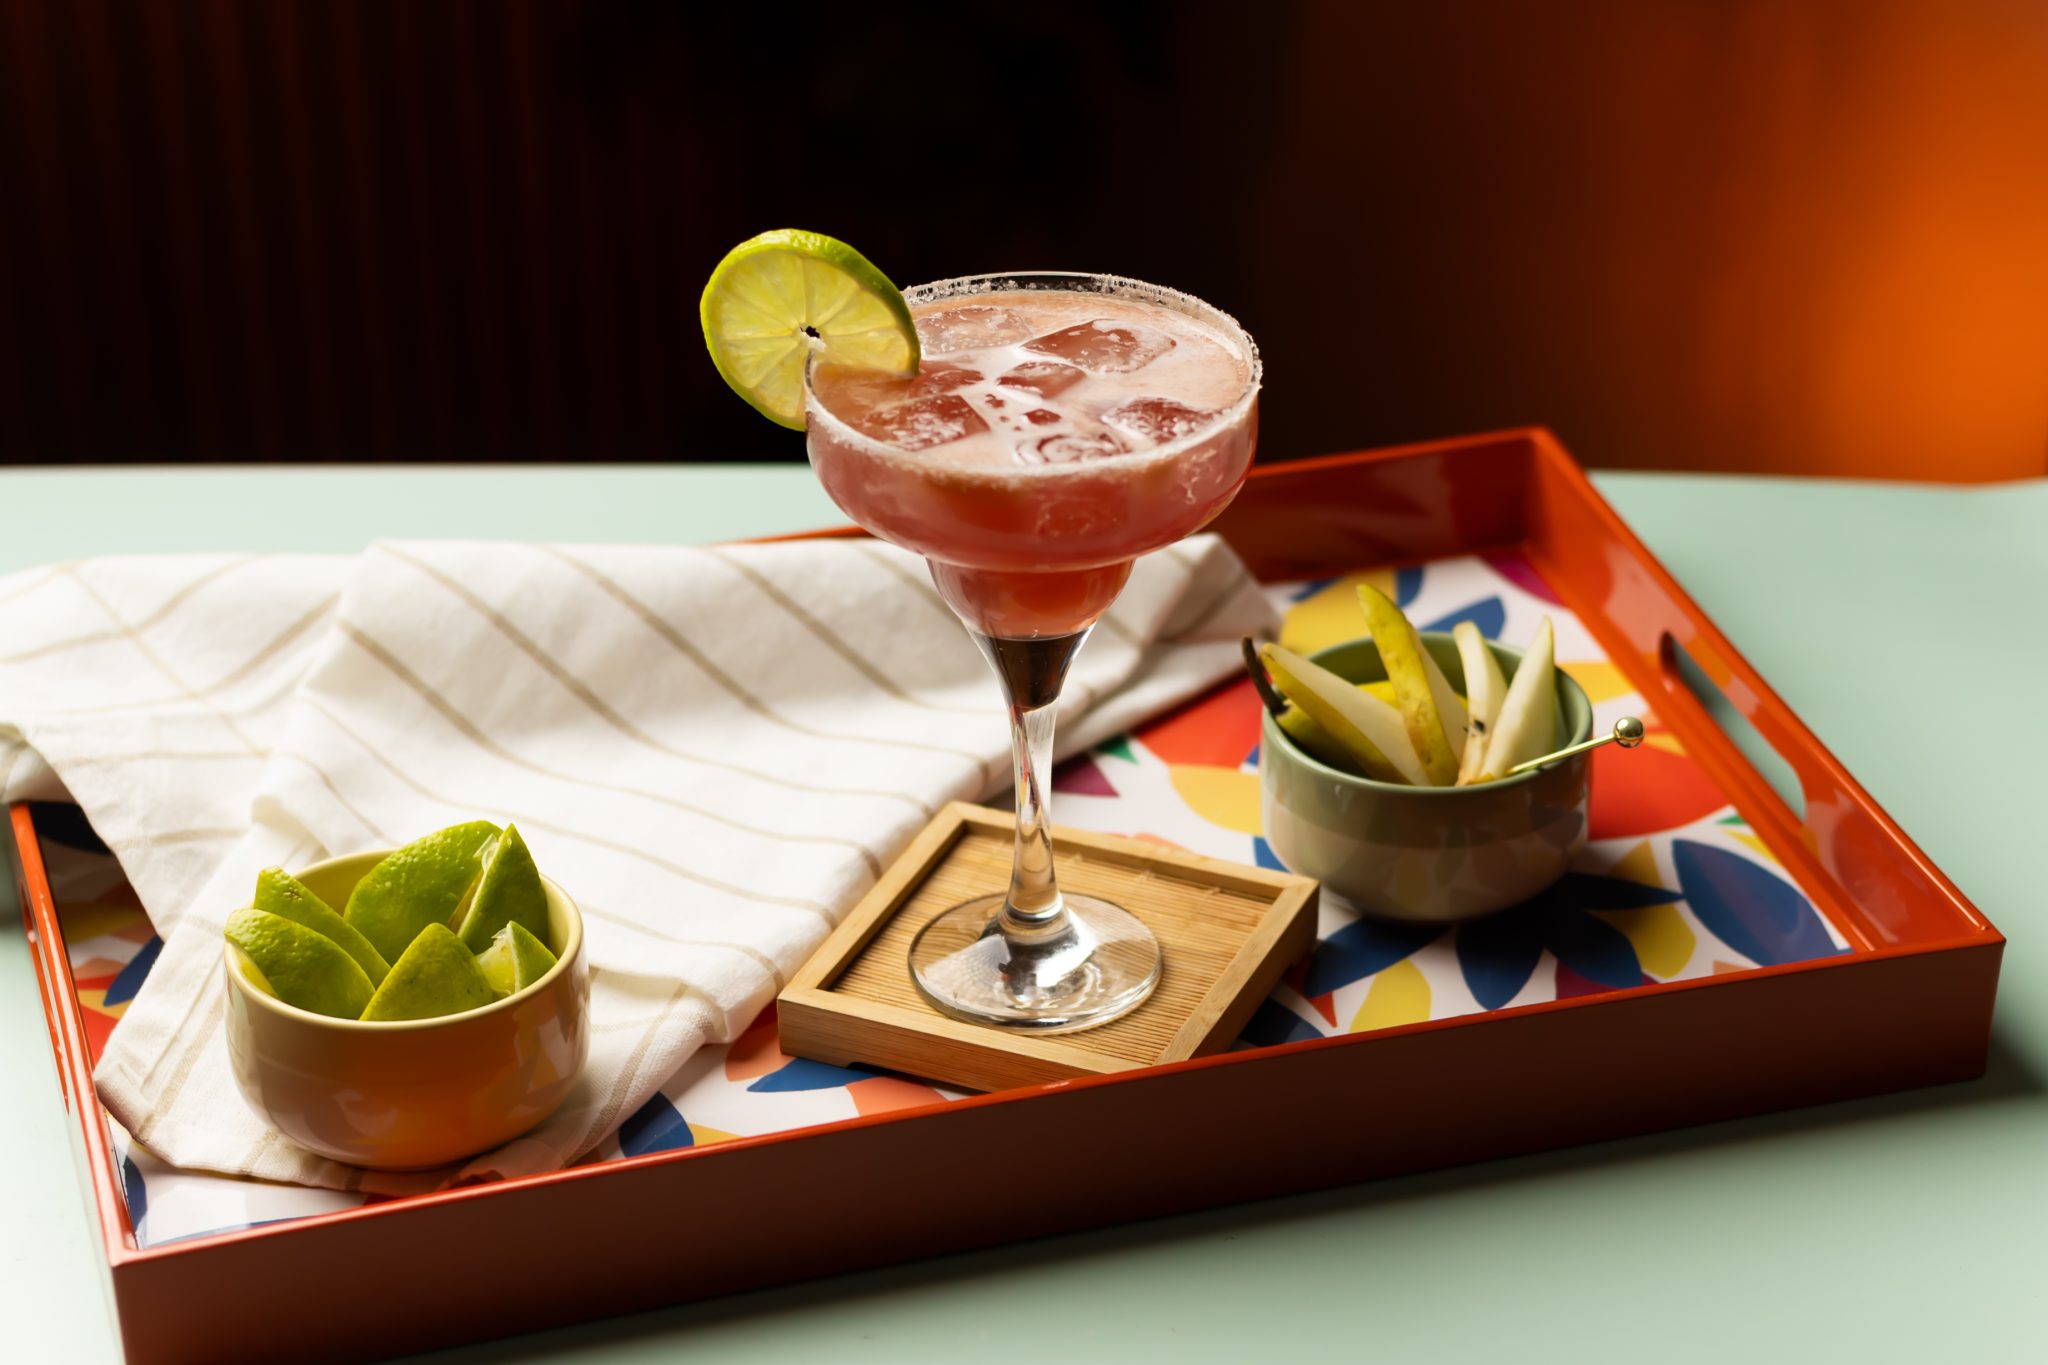 A side shot of a Prickly Pear Margarita cocktail in a margarita glass on a wooden coaster placed on a red tray surrounded by a bowl with lime wedges, a bowl with apple slices and a white cloth